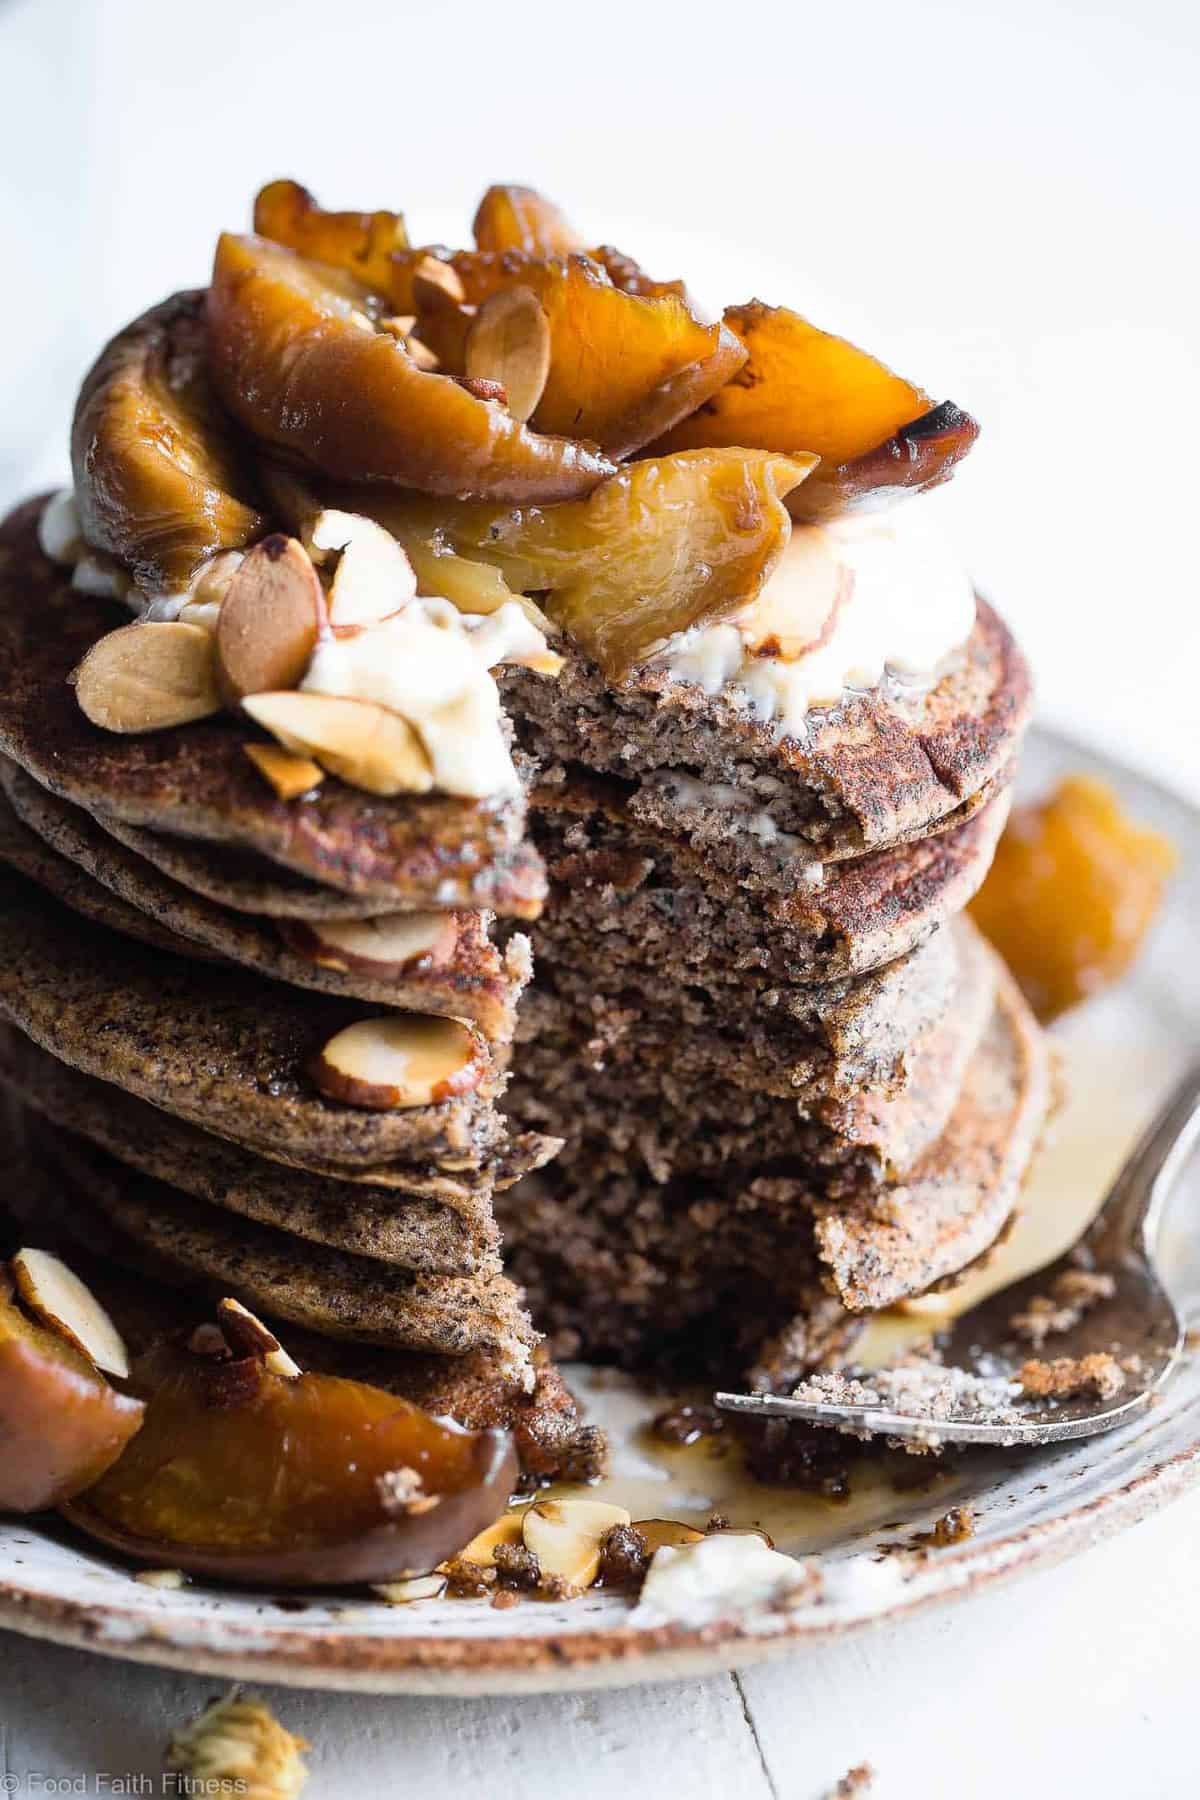 Healthy Gluten Free Buckwheat Pancakes with Roasted Peaches - SO light and fluffy that you'll never believe they're healthy, gluten free and only 170 calories a serving!  The perfect spring or summer brunch! | #Foodfaithfitness | #Glutenfree #DairyFree #Healthy #Breakfast #Pancakes